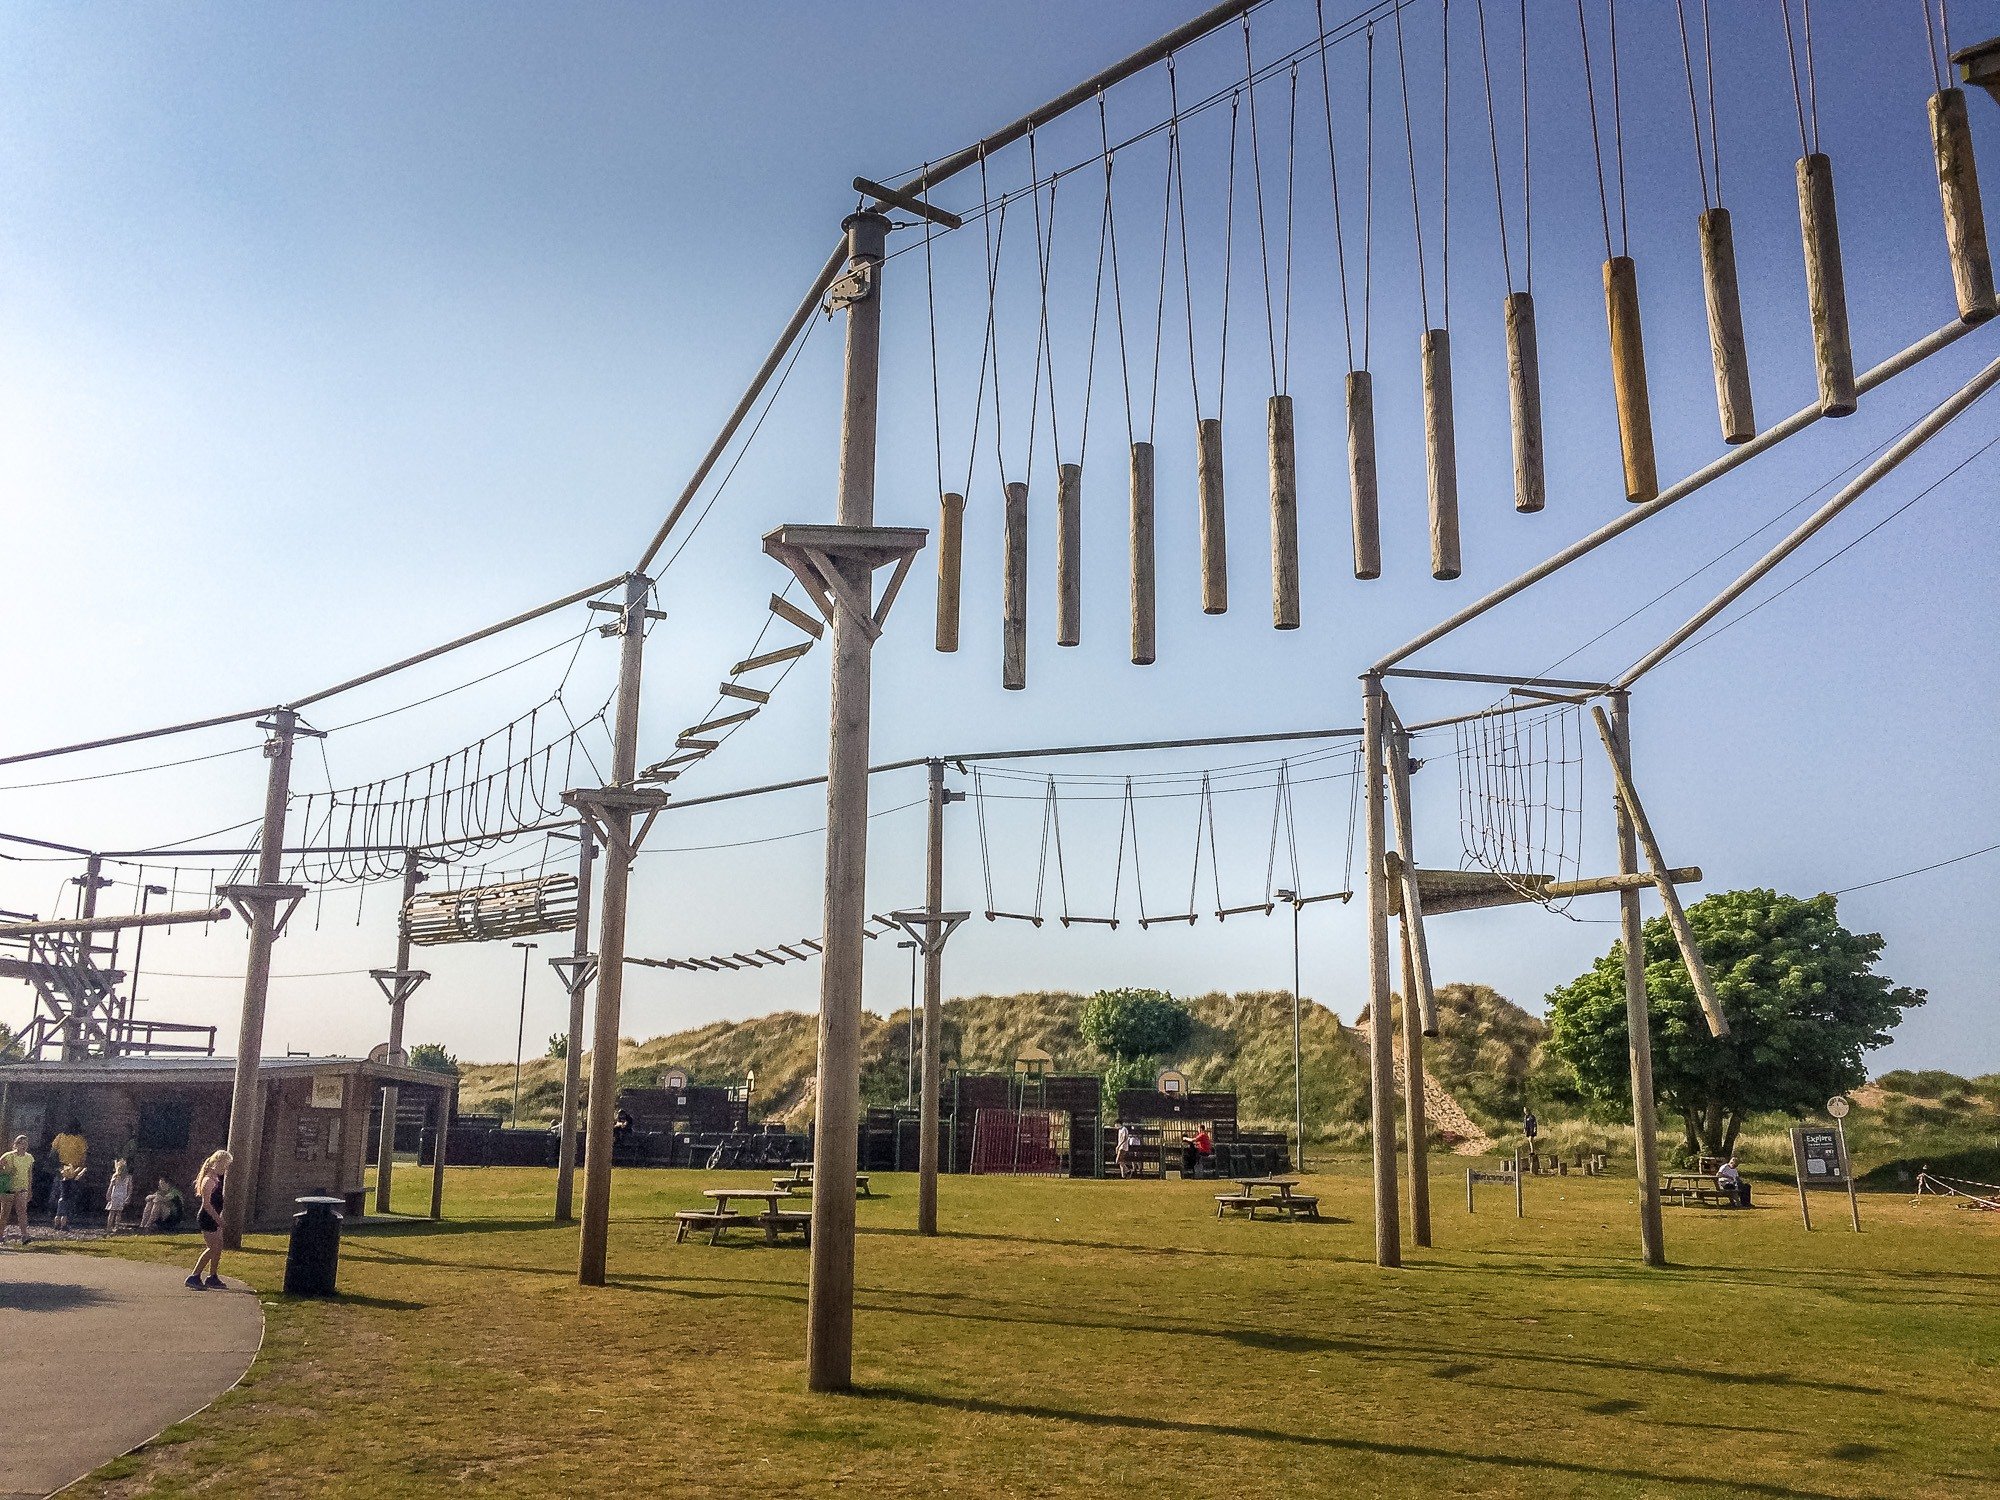 The high-ropes course at Presthaven holiday park.